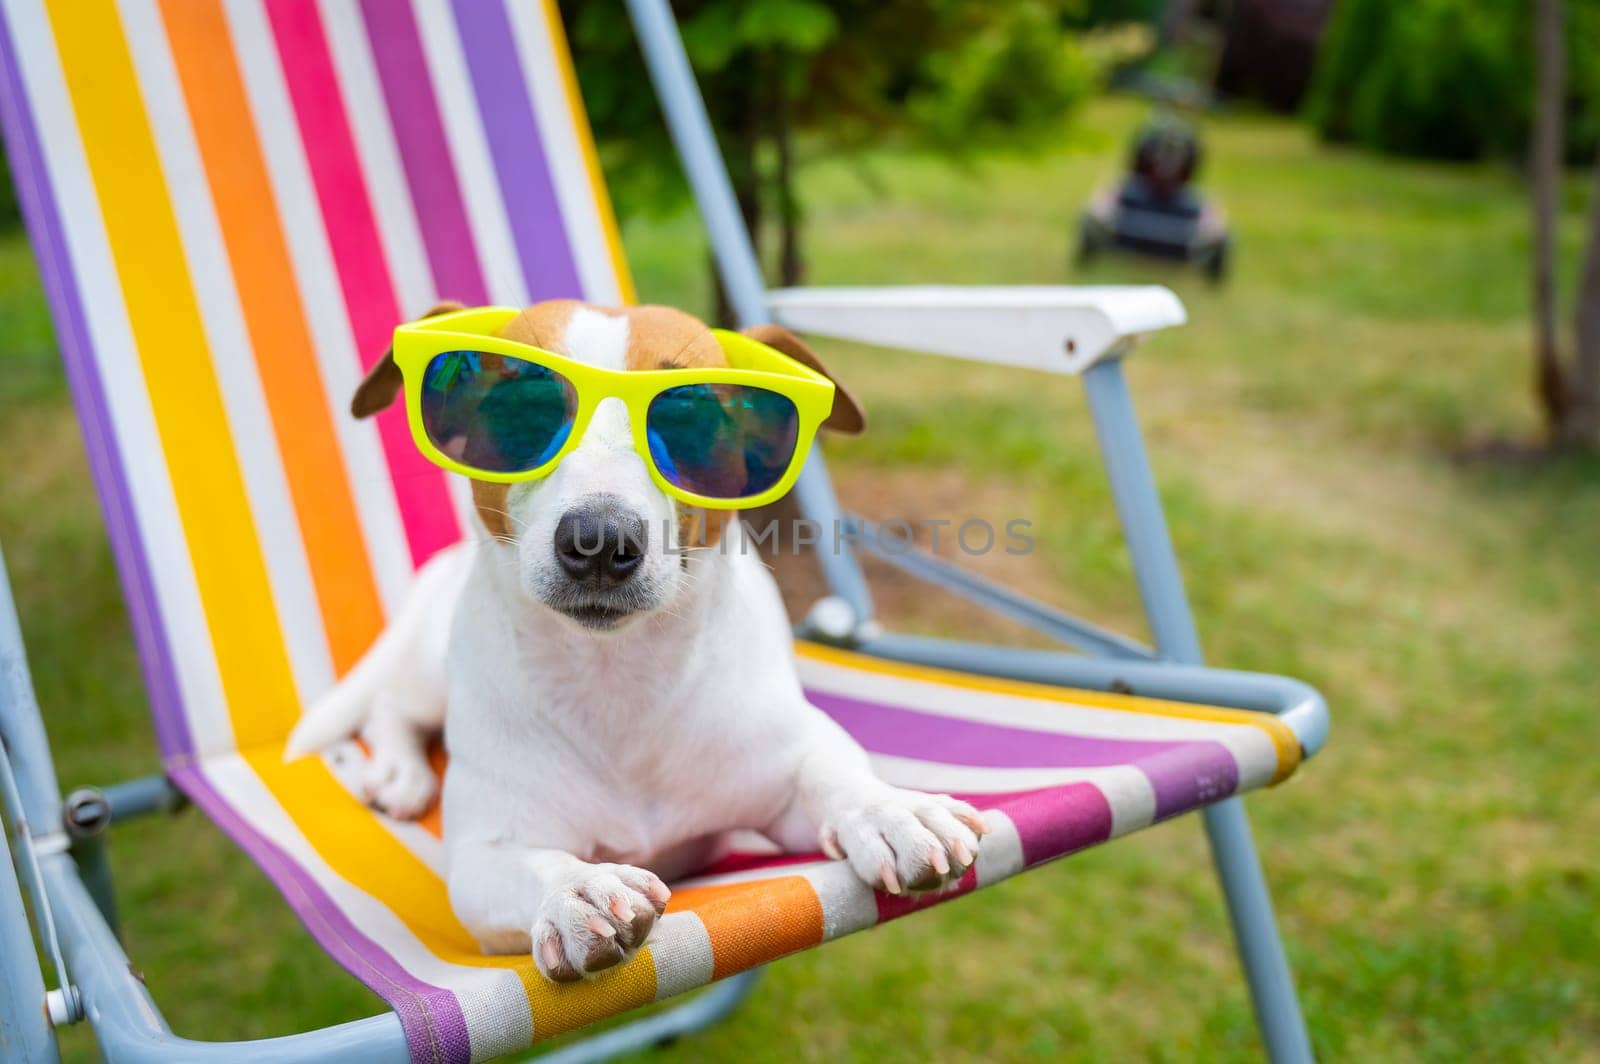 Jack russell terrier dog in sunglasses is resting on a sun lounger. Summer vacation concept